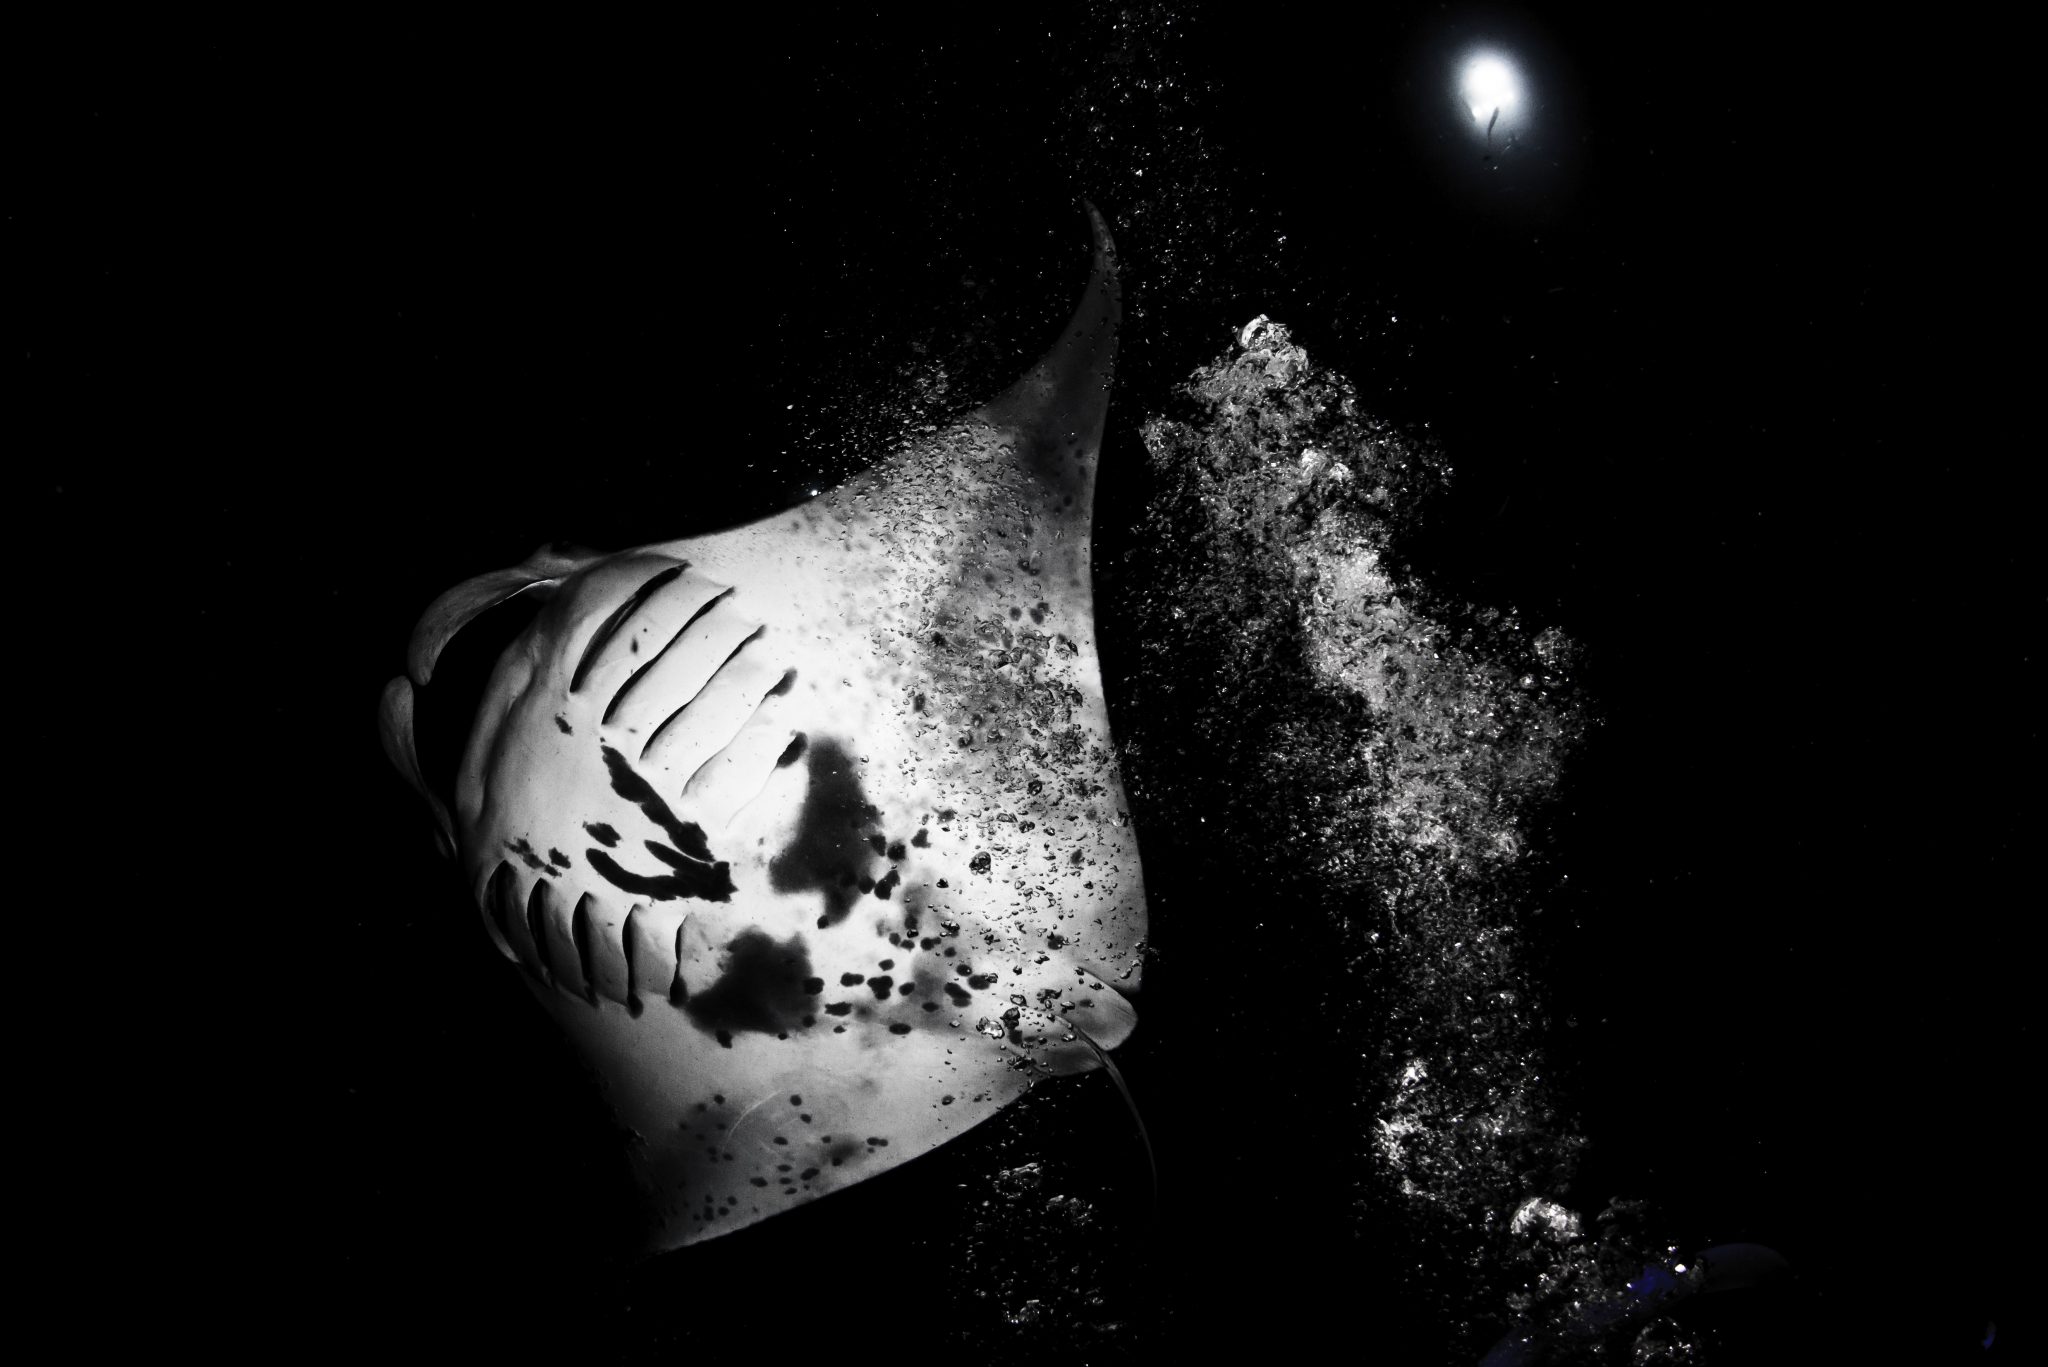 A manta ray playing among a scuba diver's bubbles during a night dive